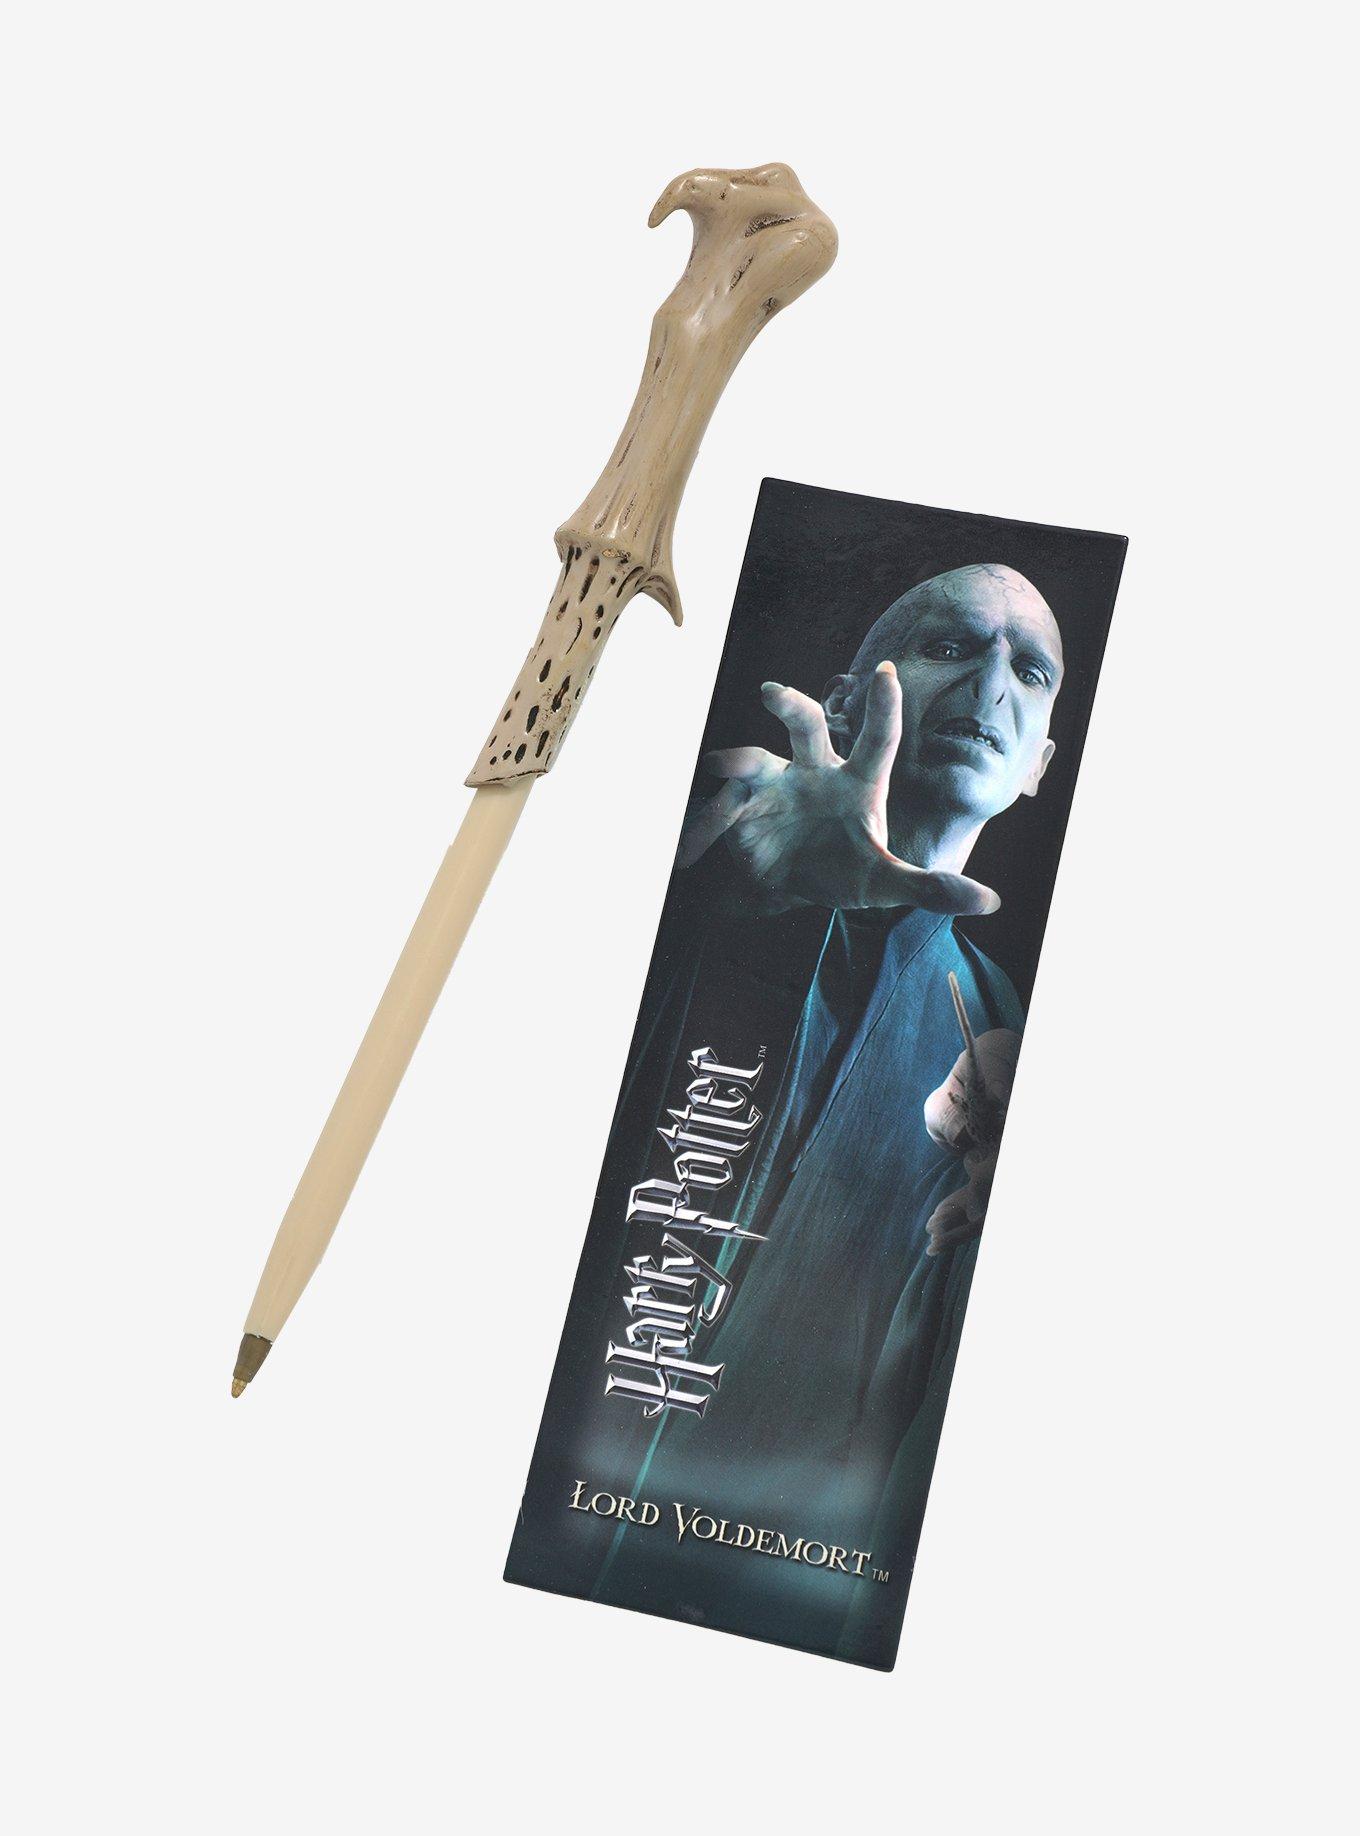 Harry Potter Wand Pen and Bookmark